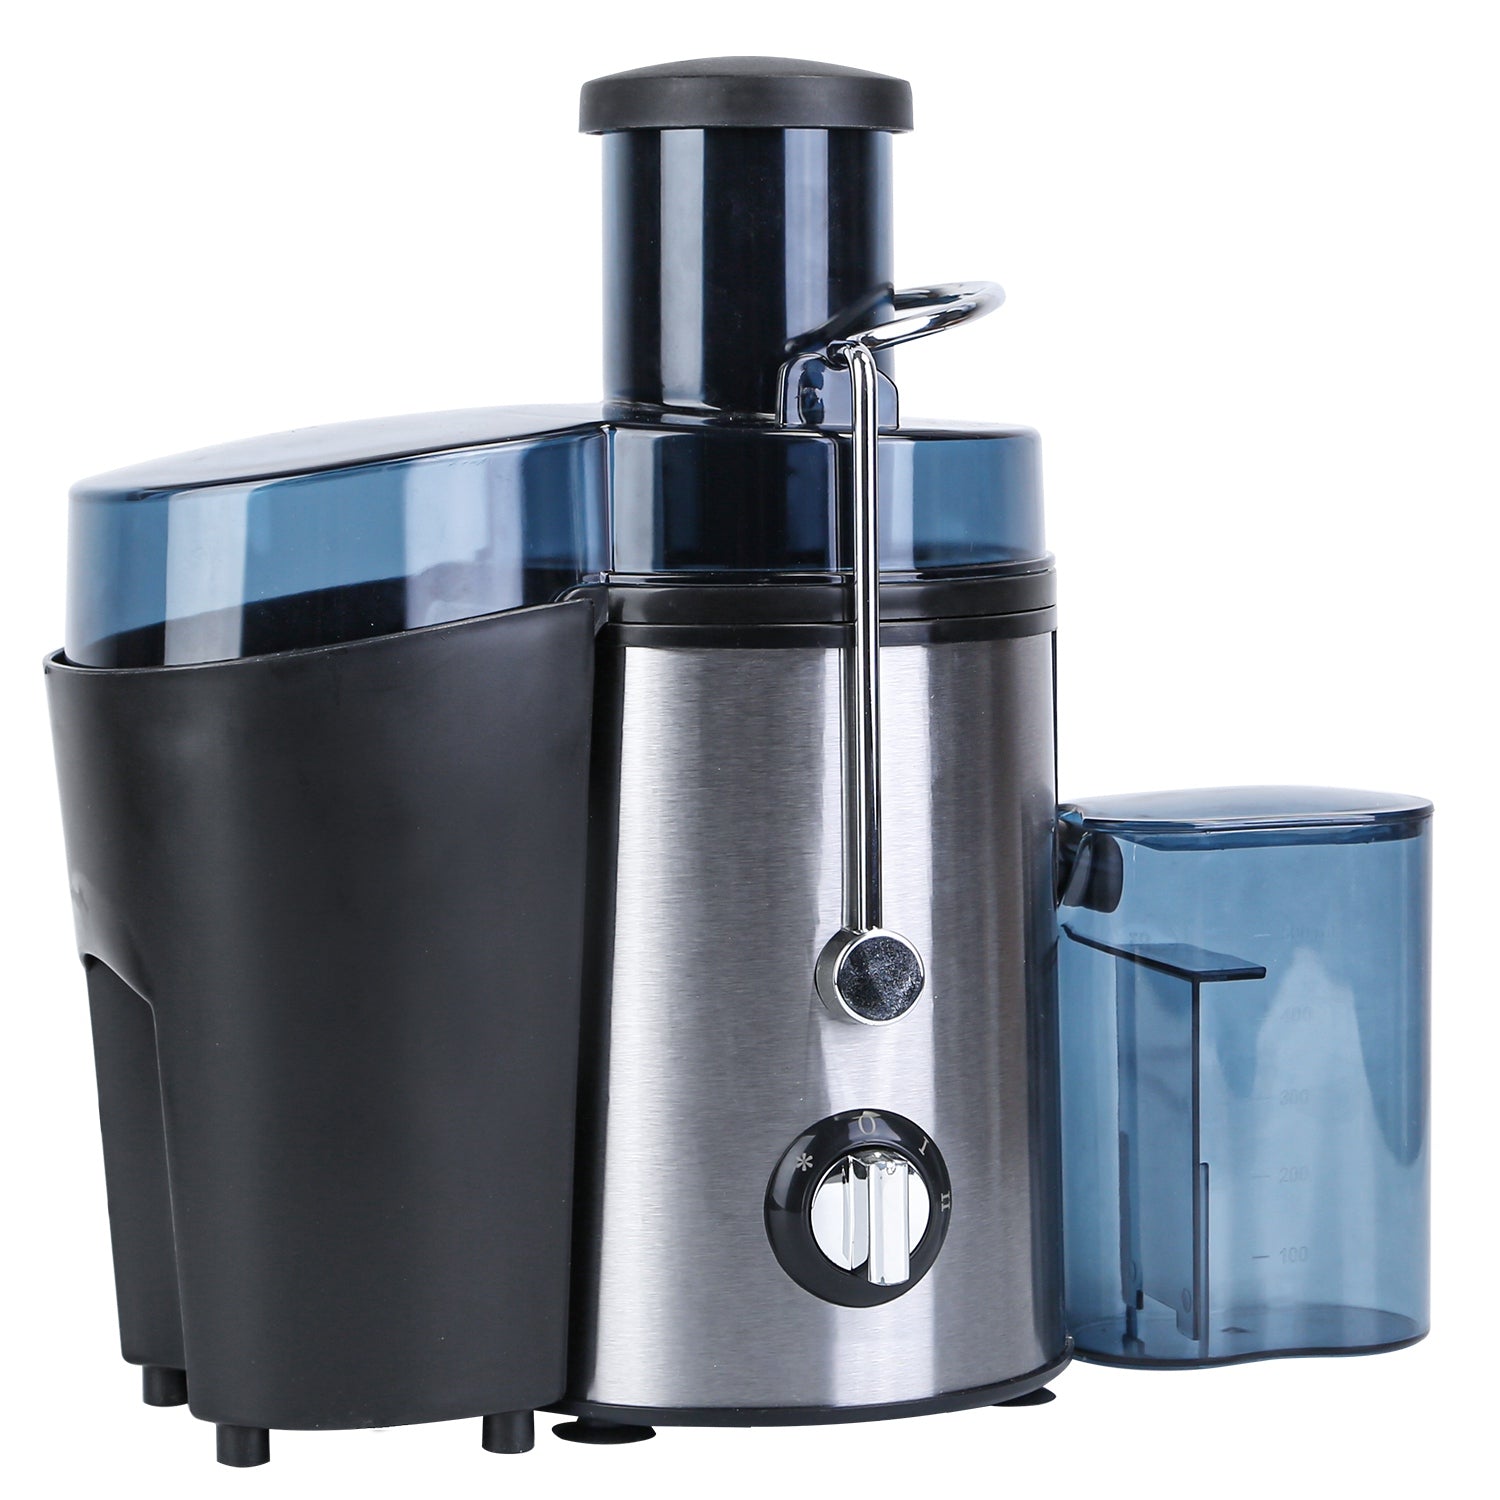 title:1000W Centrifugal Juicer Juice Extractor with 2 Speeds 3.6in Wide Feed Chute 17Oz Juicer Cup 54Oz Pulp Collector Electric Juicer for Fruits Vegetables;color:Black